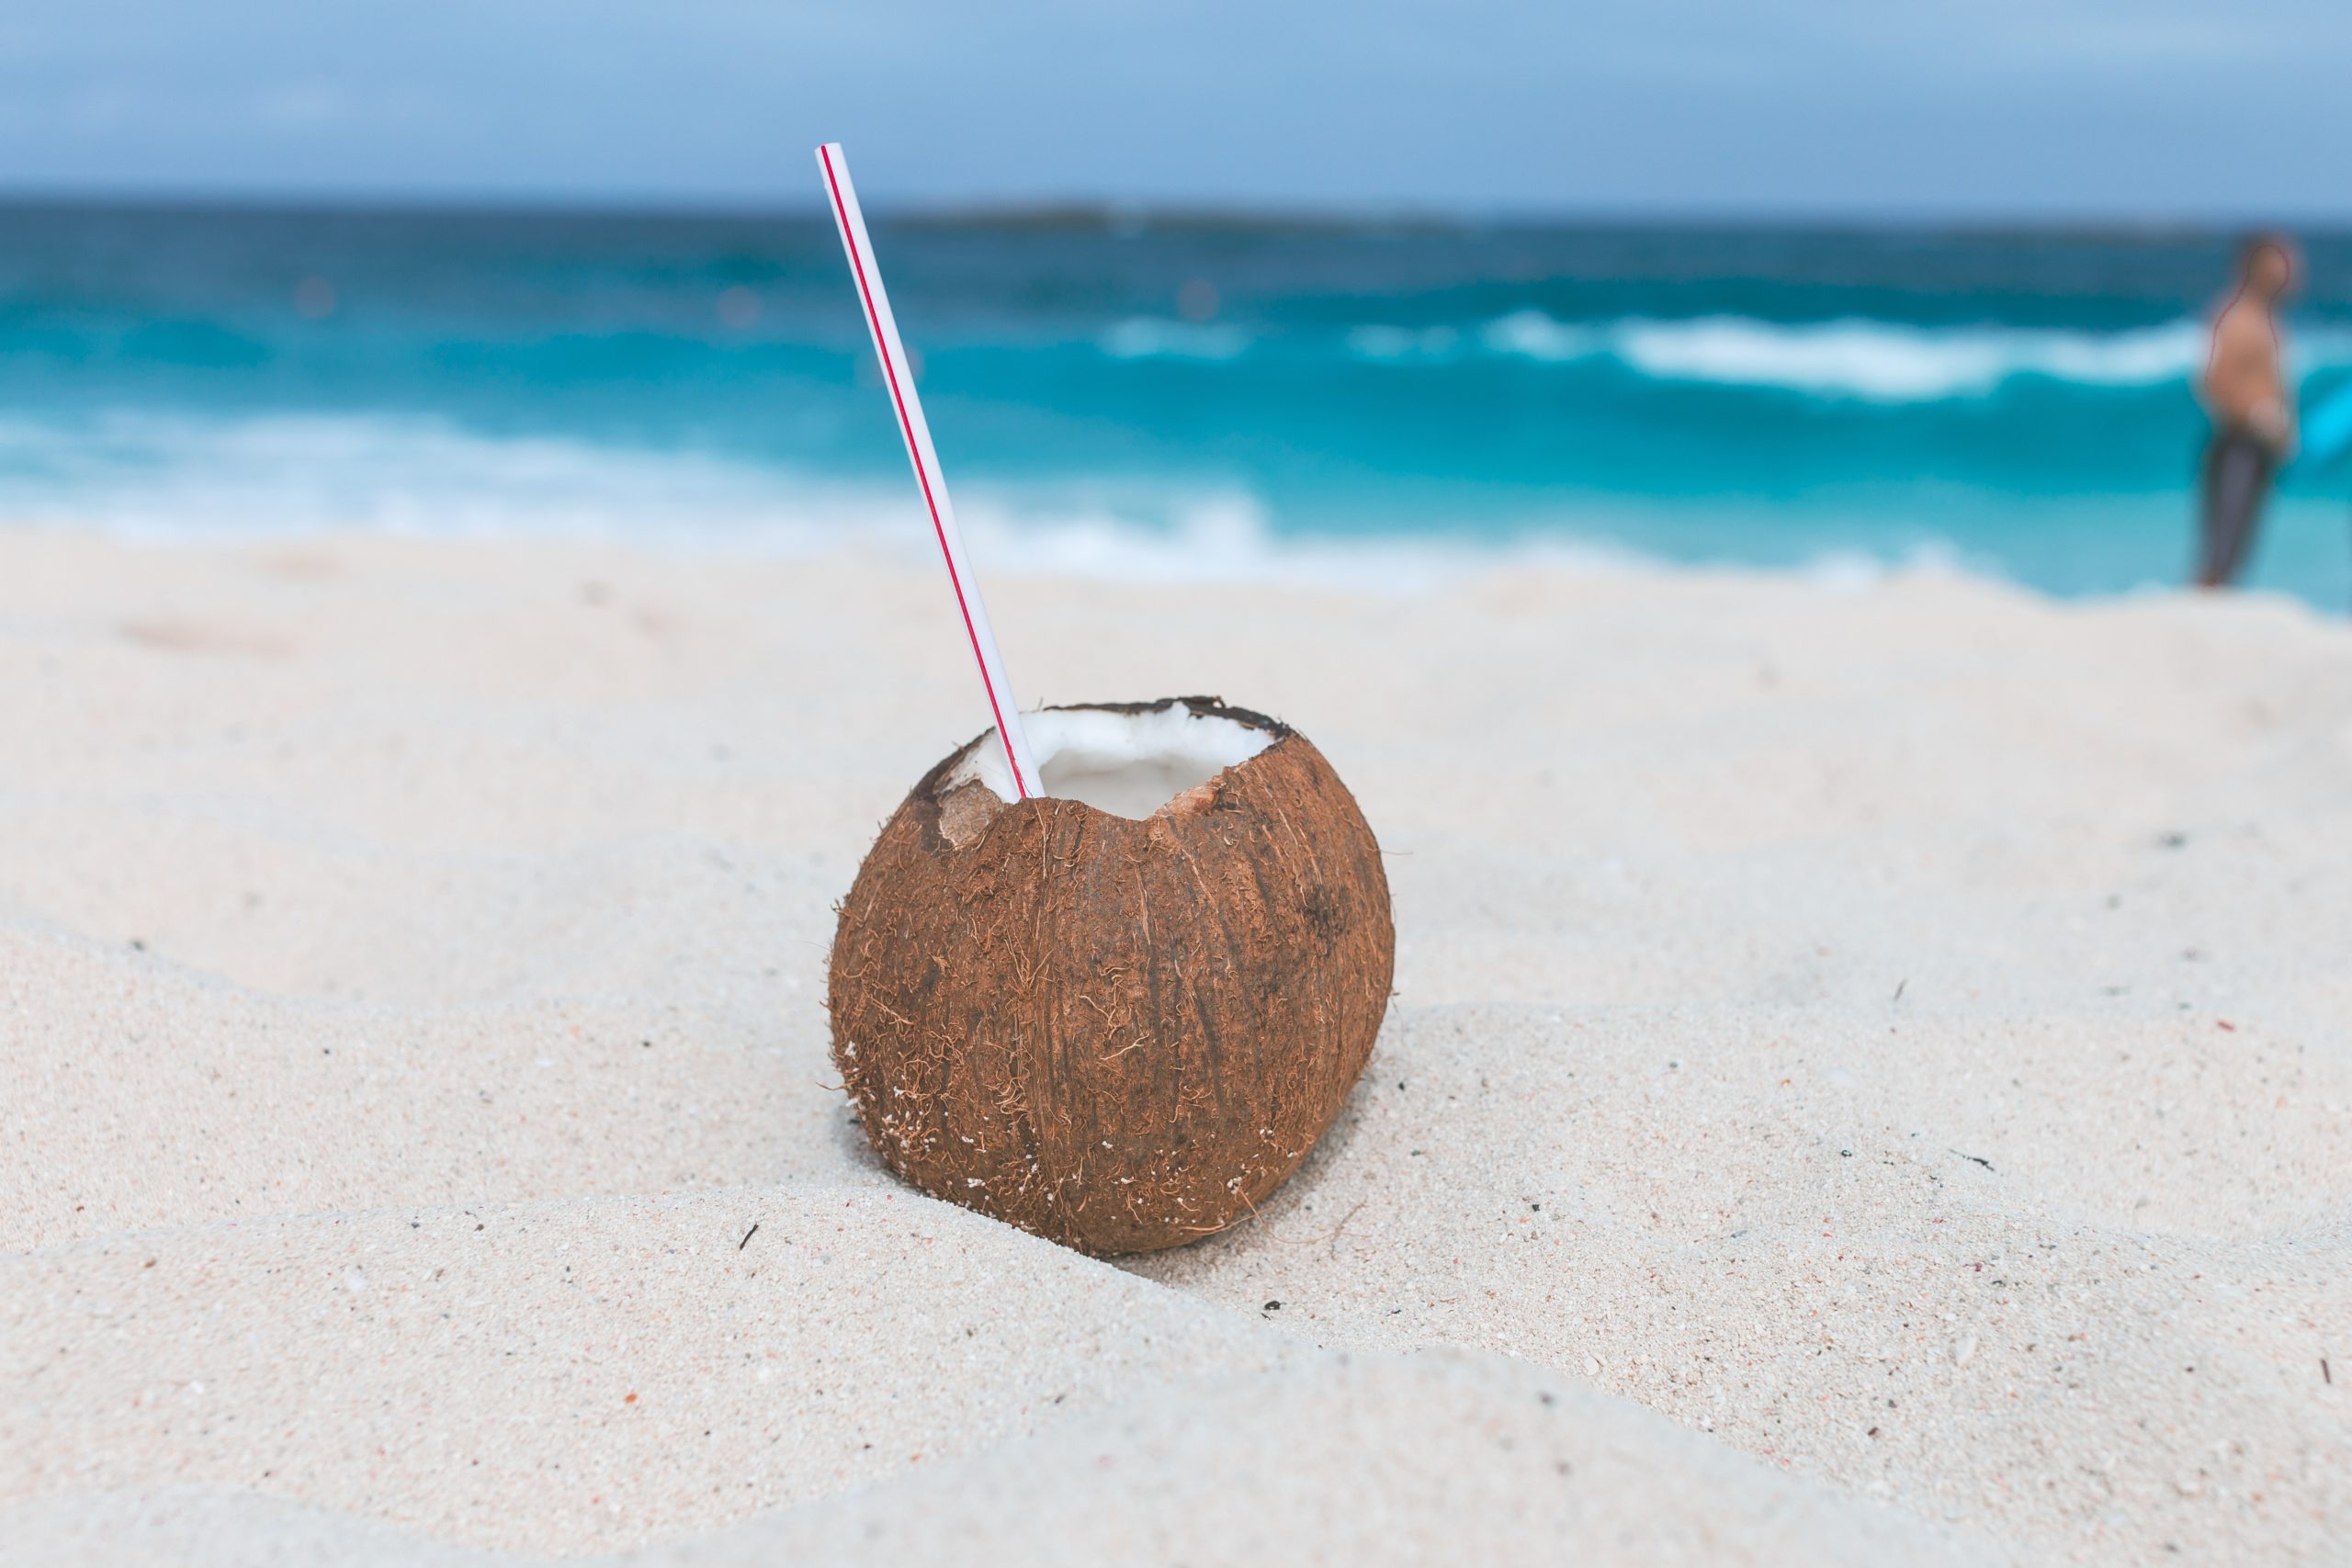 A closeup of a coconut drink nestled in the sand at the beach